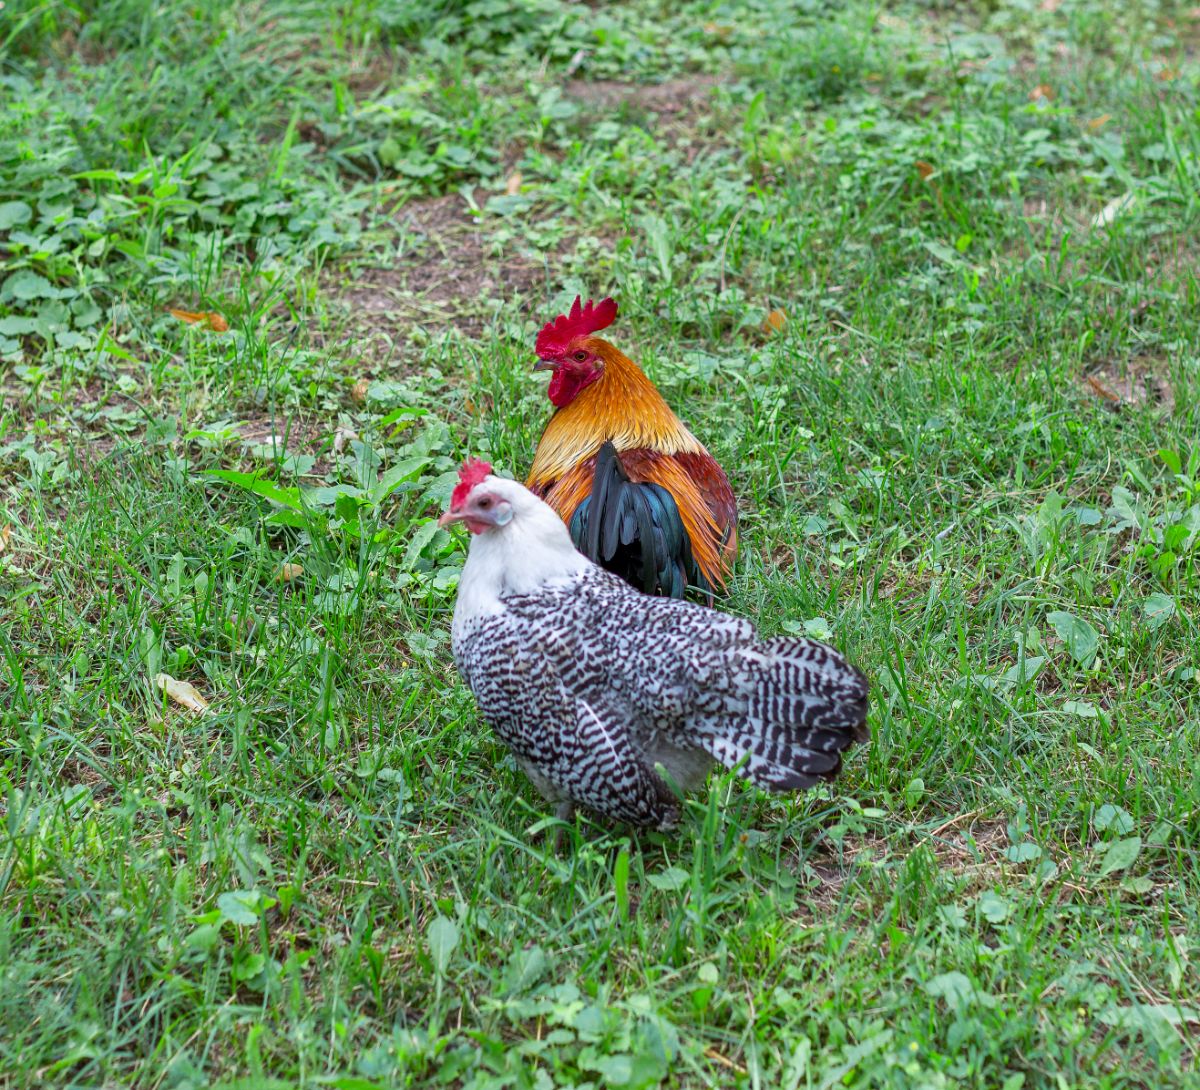 An Egyptian Fayoumi Chicken and a brown rooster in a backyard pasture.